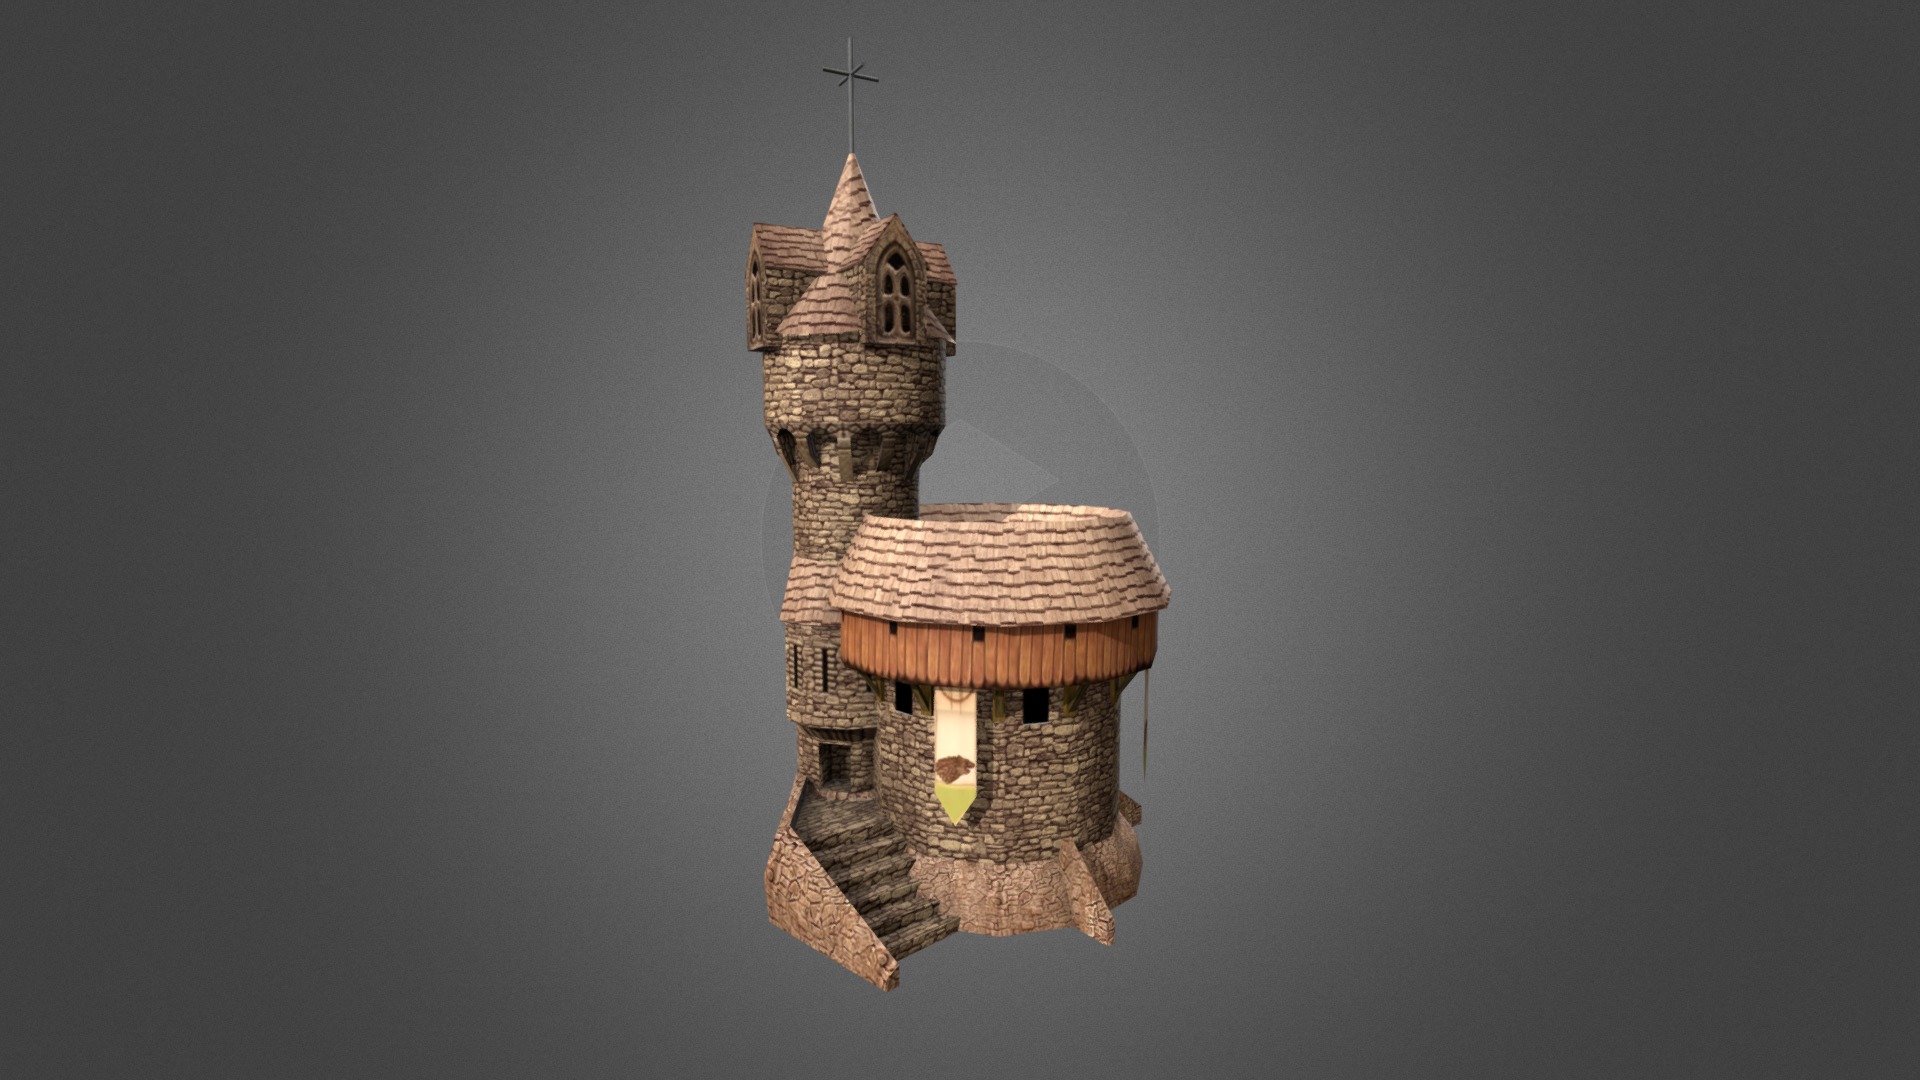 Low poly game-ready 3d model of a Medieval Church

Download: http://gamedev.cgduck.pro - Medieval Church - 3D model by CG Duck (@cg_duck) 3d model